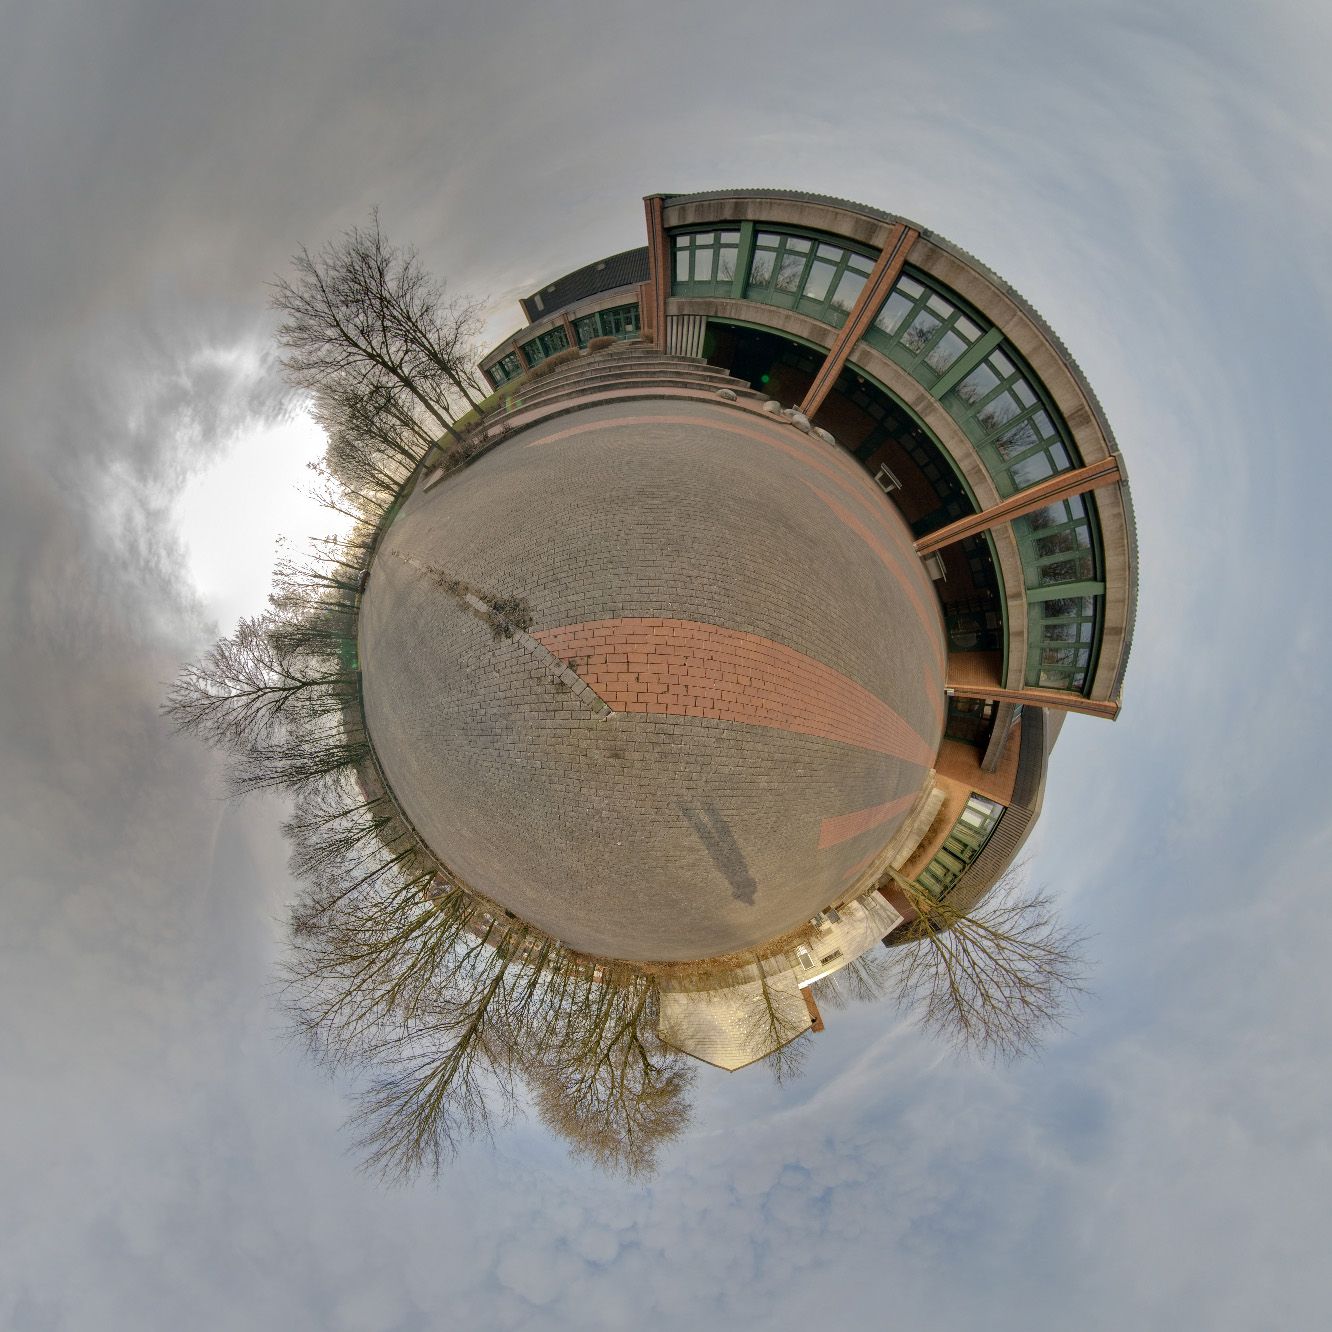 Panorama 008 - Little Planet